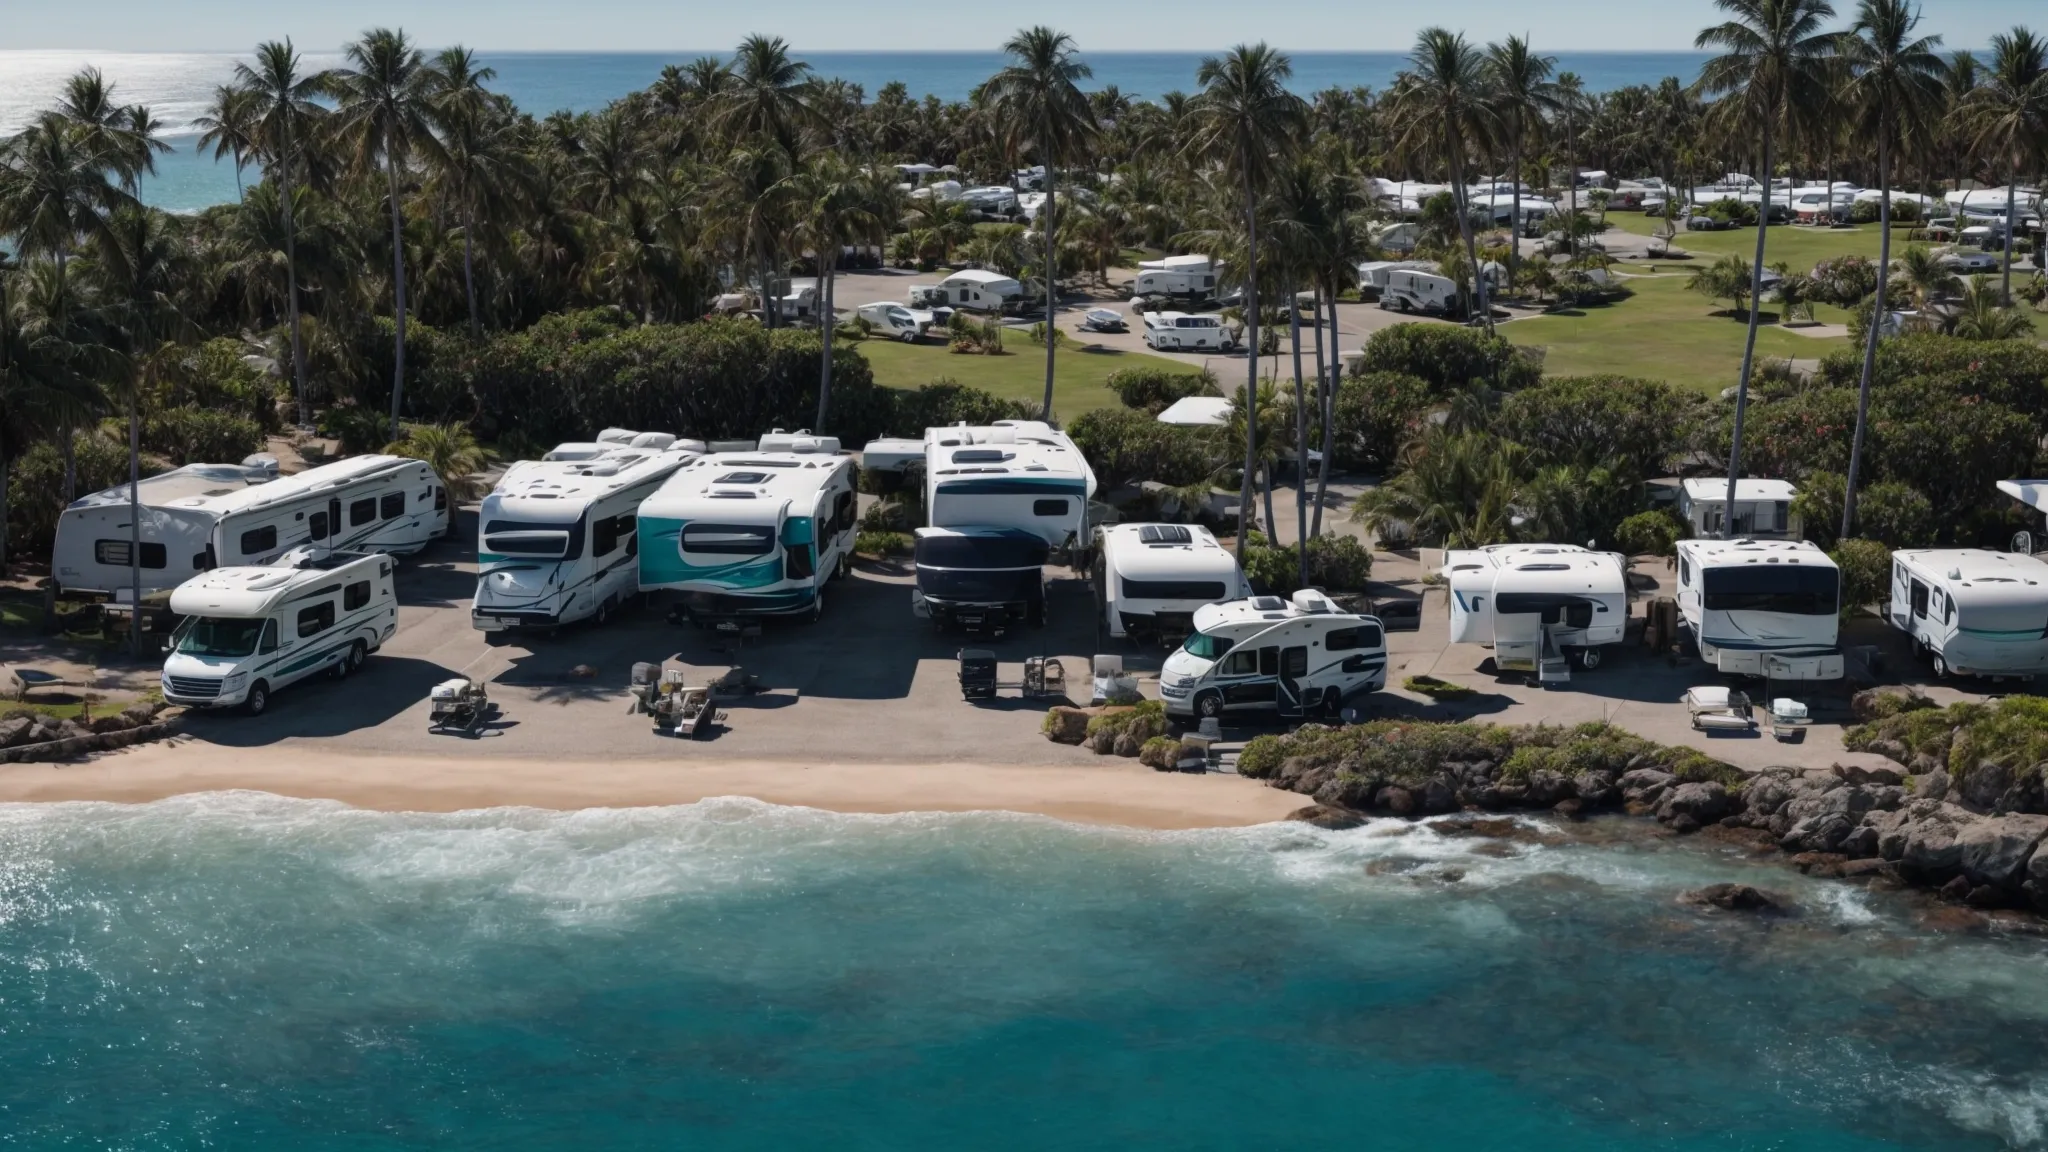 a sprawling rv park overlooking the pacific ocean under a clear blue sky, dotted with modern recreational vehicles near palm trees and picnic tables.